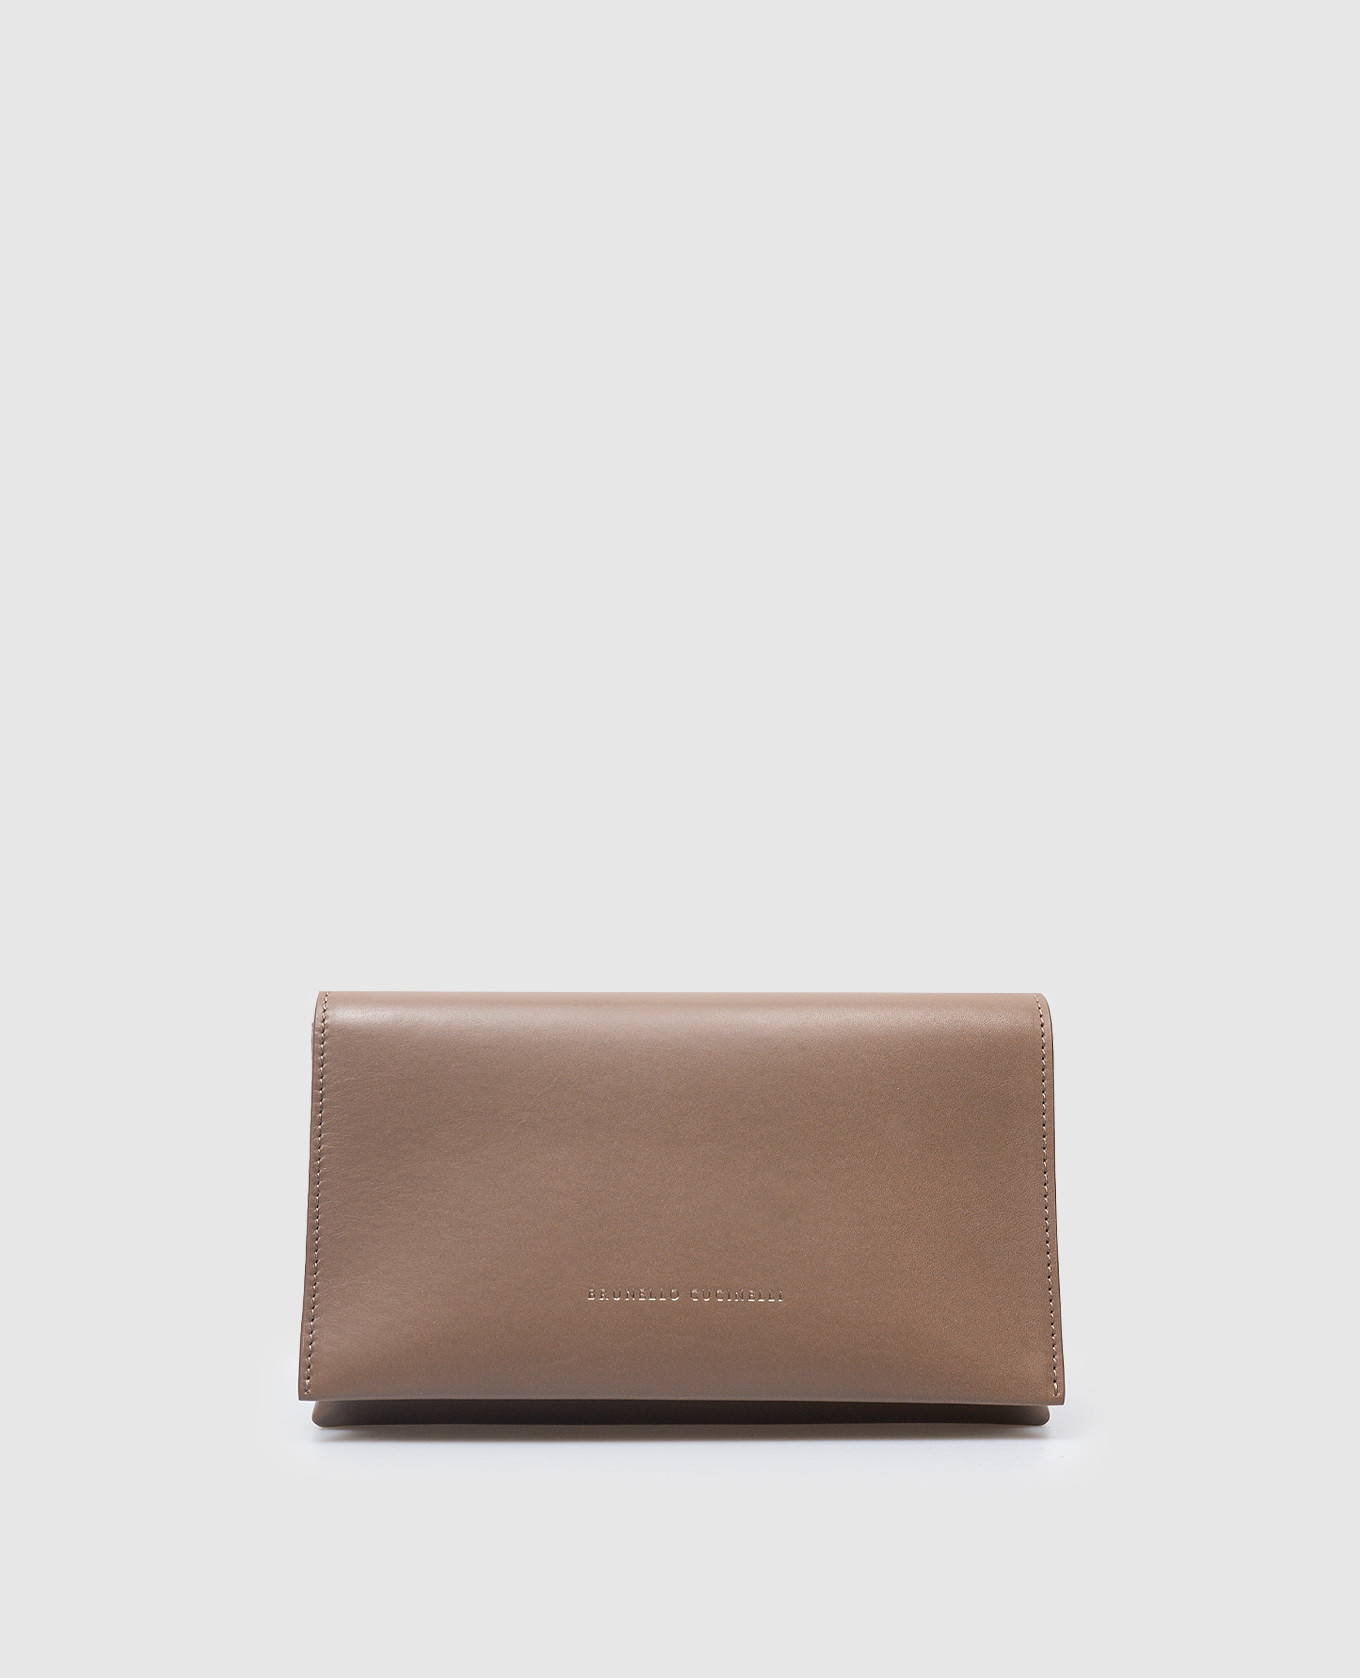 Brown leather clutch with logo